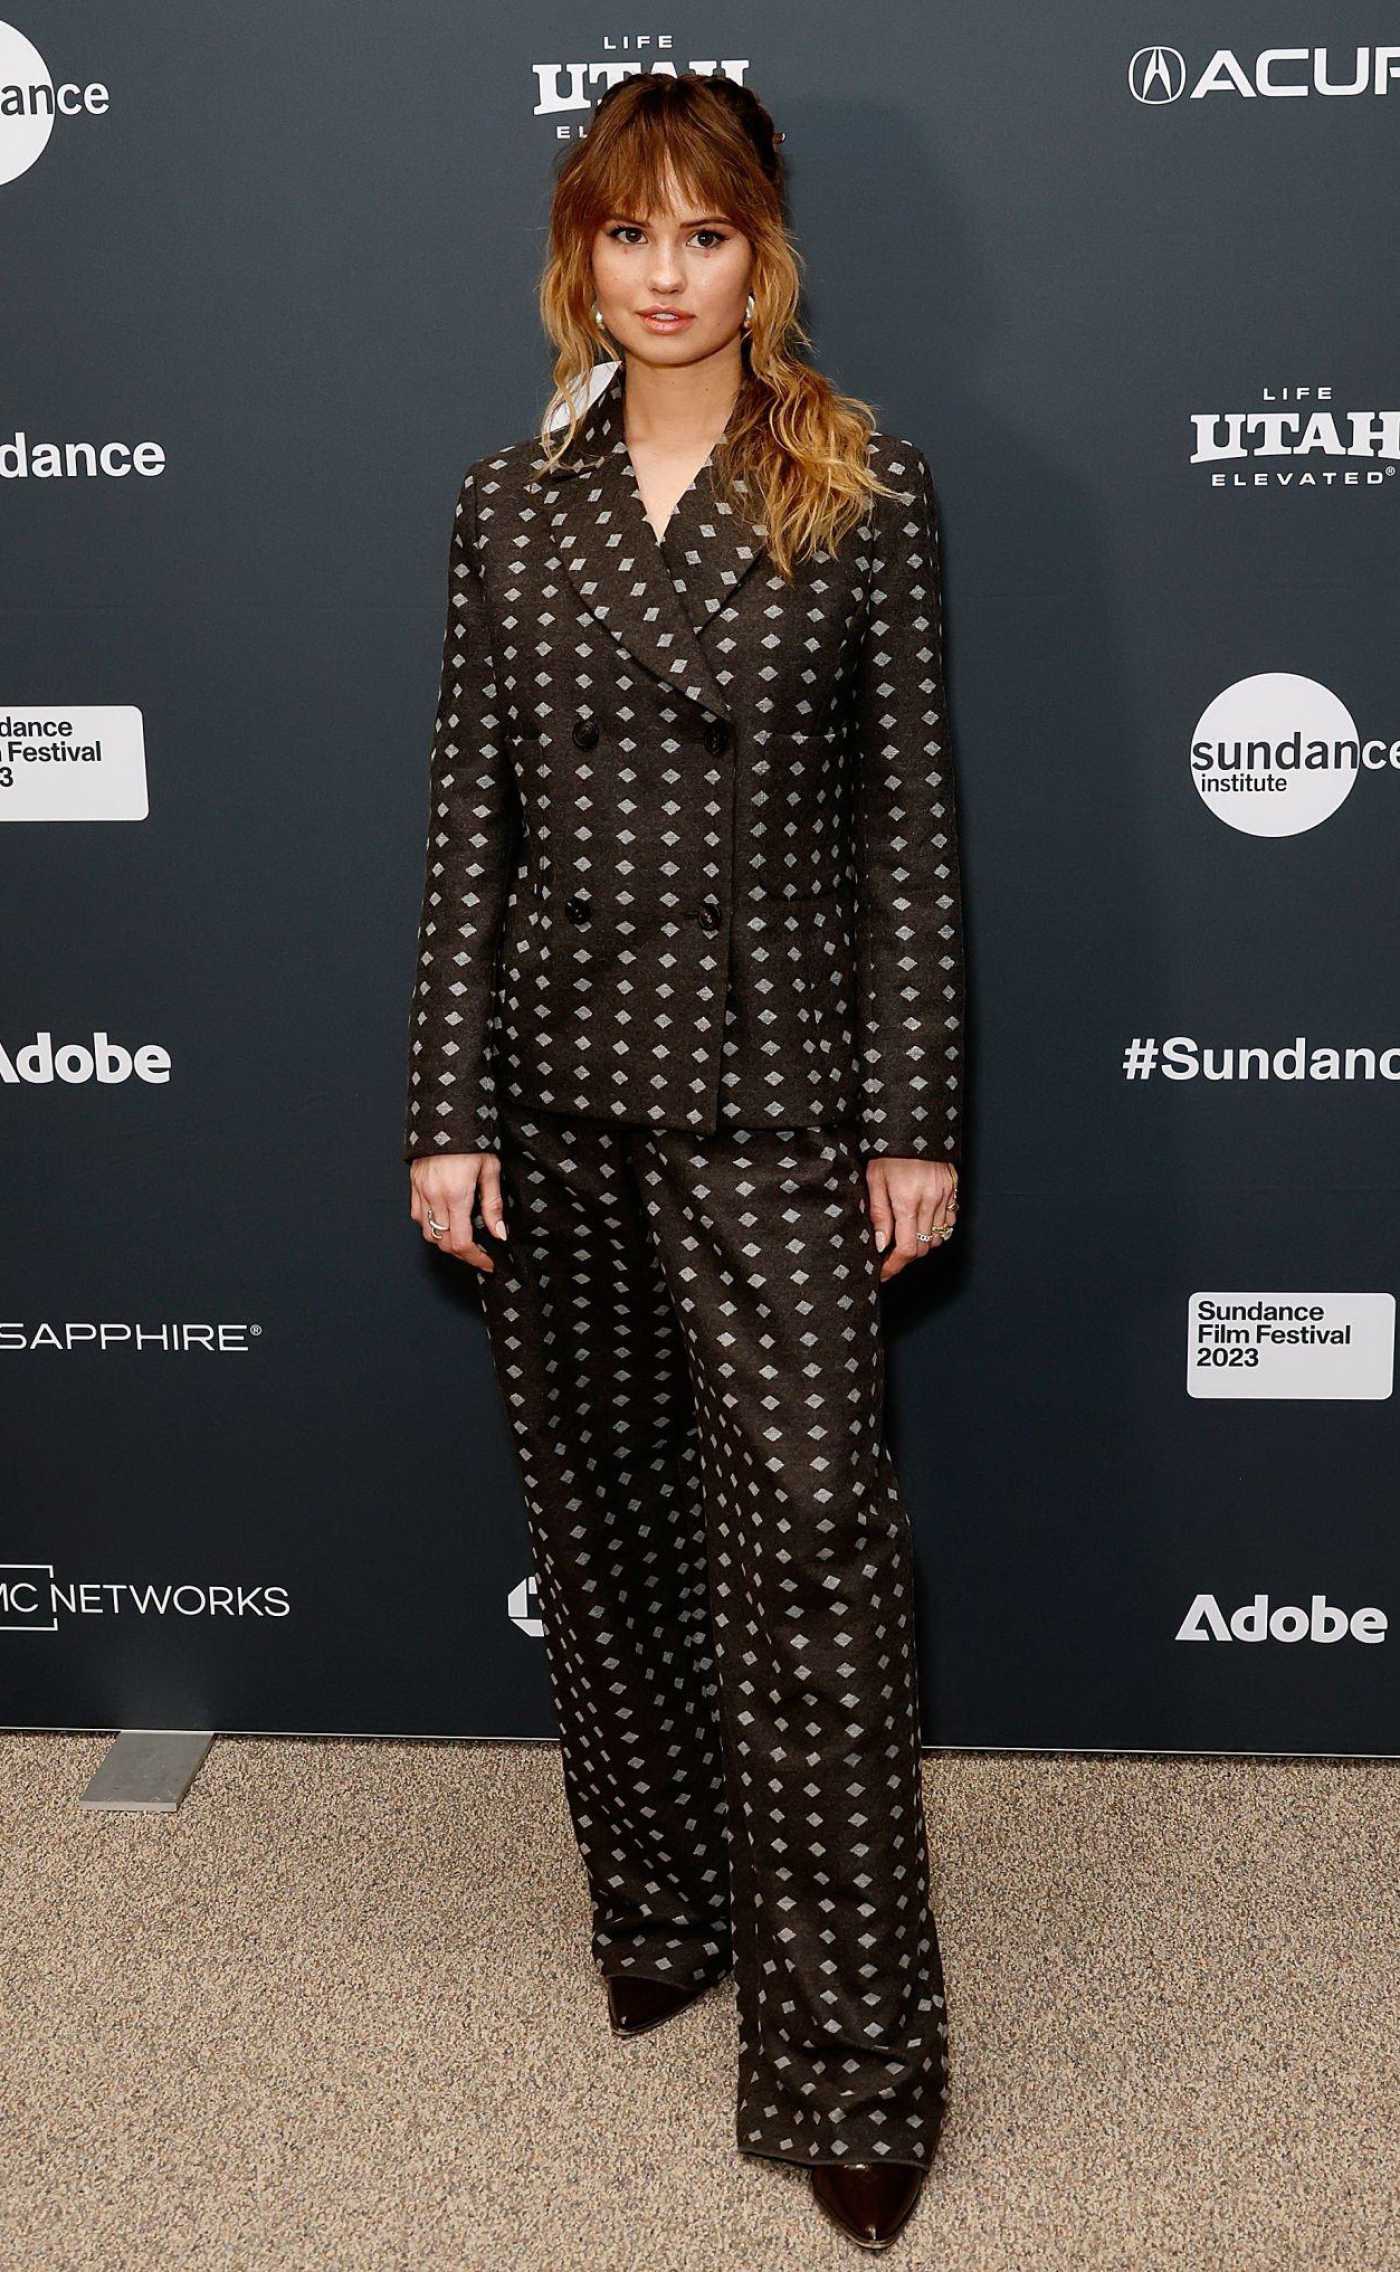 Debby Ryan Attends Shortcomings Premiere During 2023 Sundance Film Festival in a Park City 01/22/2023